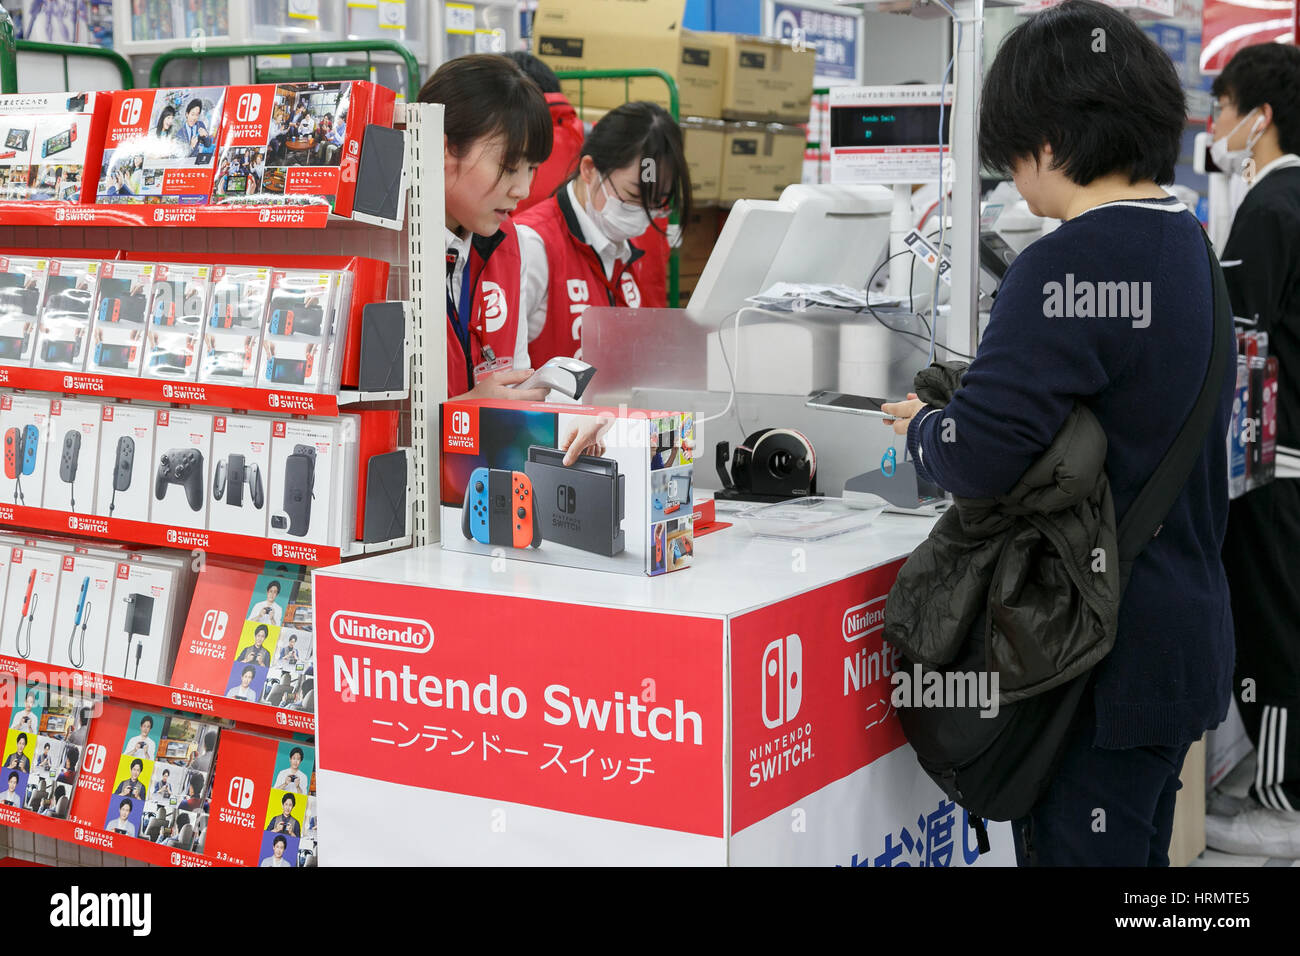 Tokyo Japan 3rd March 17 Japanese Gamers Buy The New Nintendo Switch Console At Bic Camera Ikebukuro Branch On March 3 17 Tokyo Japan Over 100 Nintendo Fans Lined Up From Early